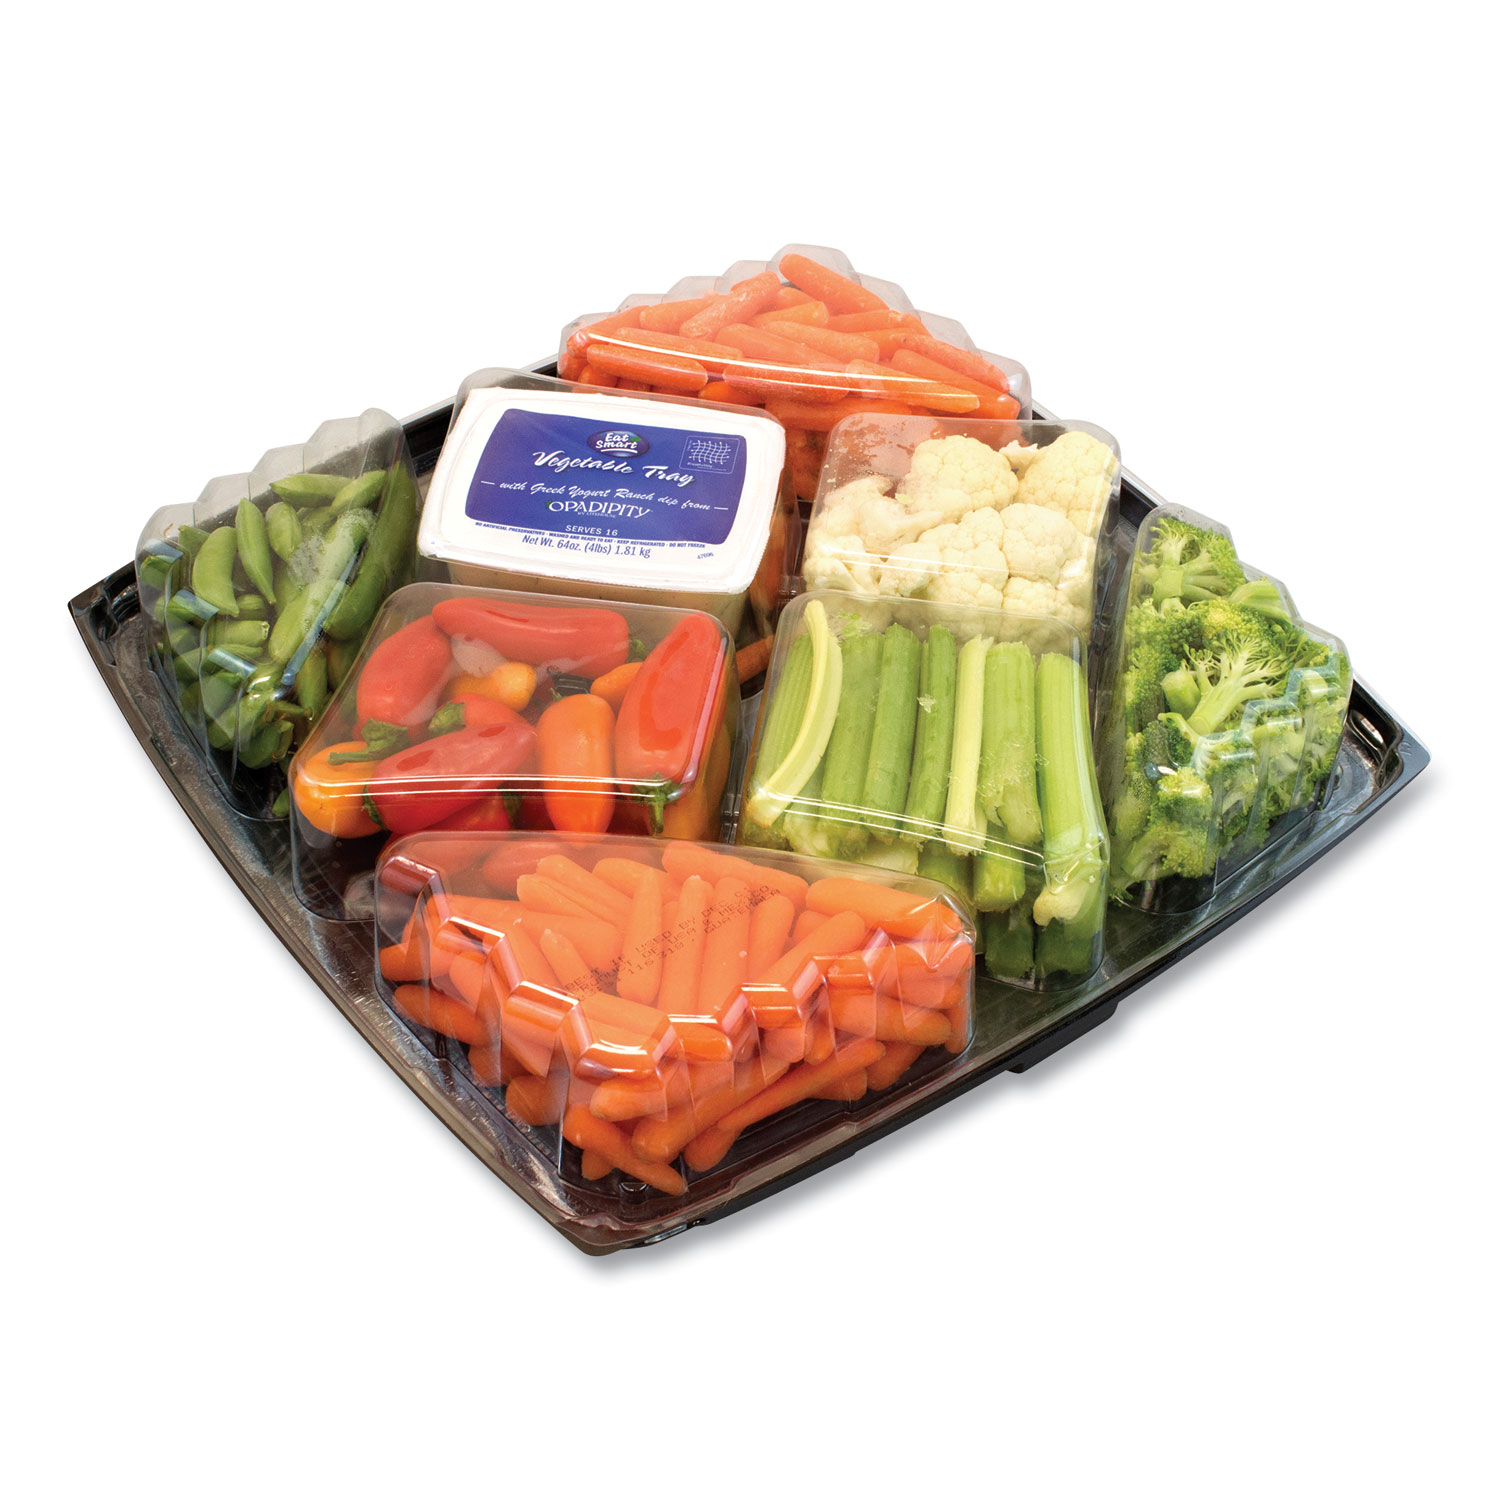  National Brand 608628 Gourmet Vegetable Tray with Ranch Dressing, 4 lbs, Free Delivery in 1-4 Business Days (GRR90200063) 